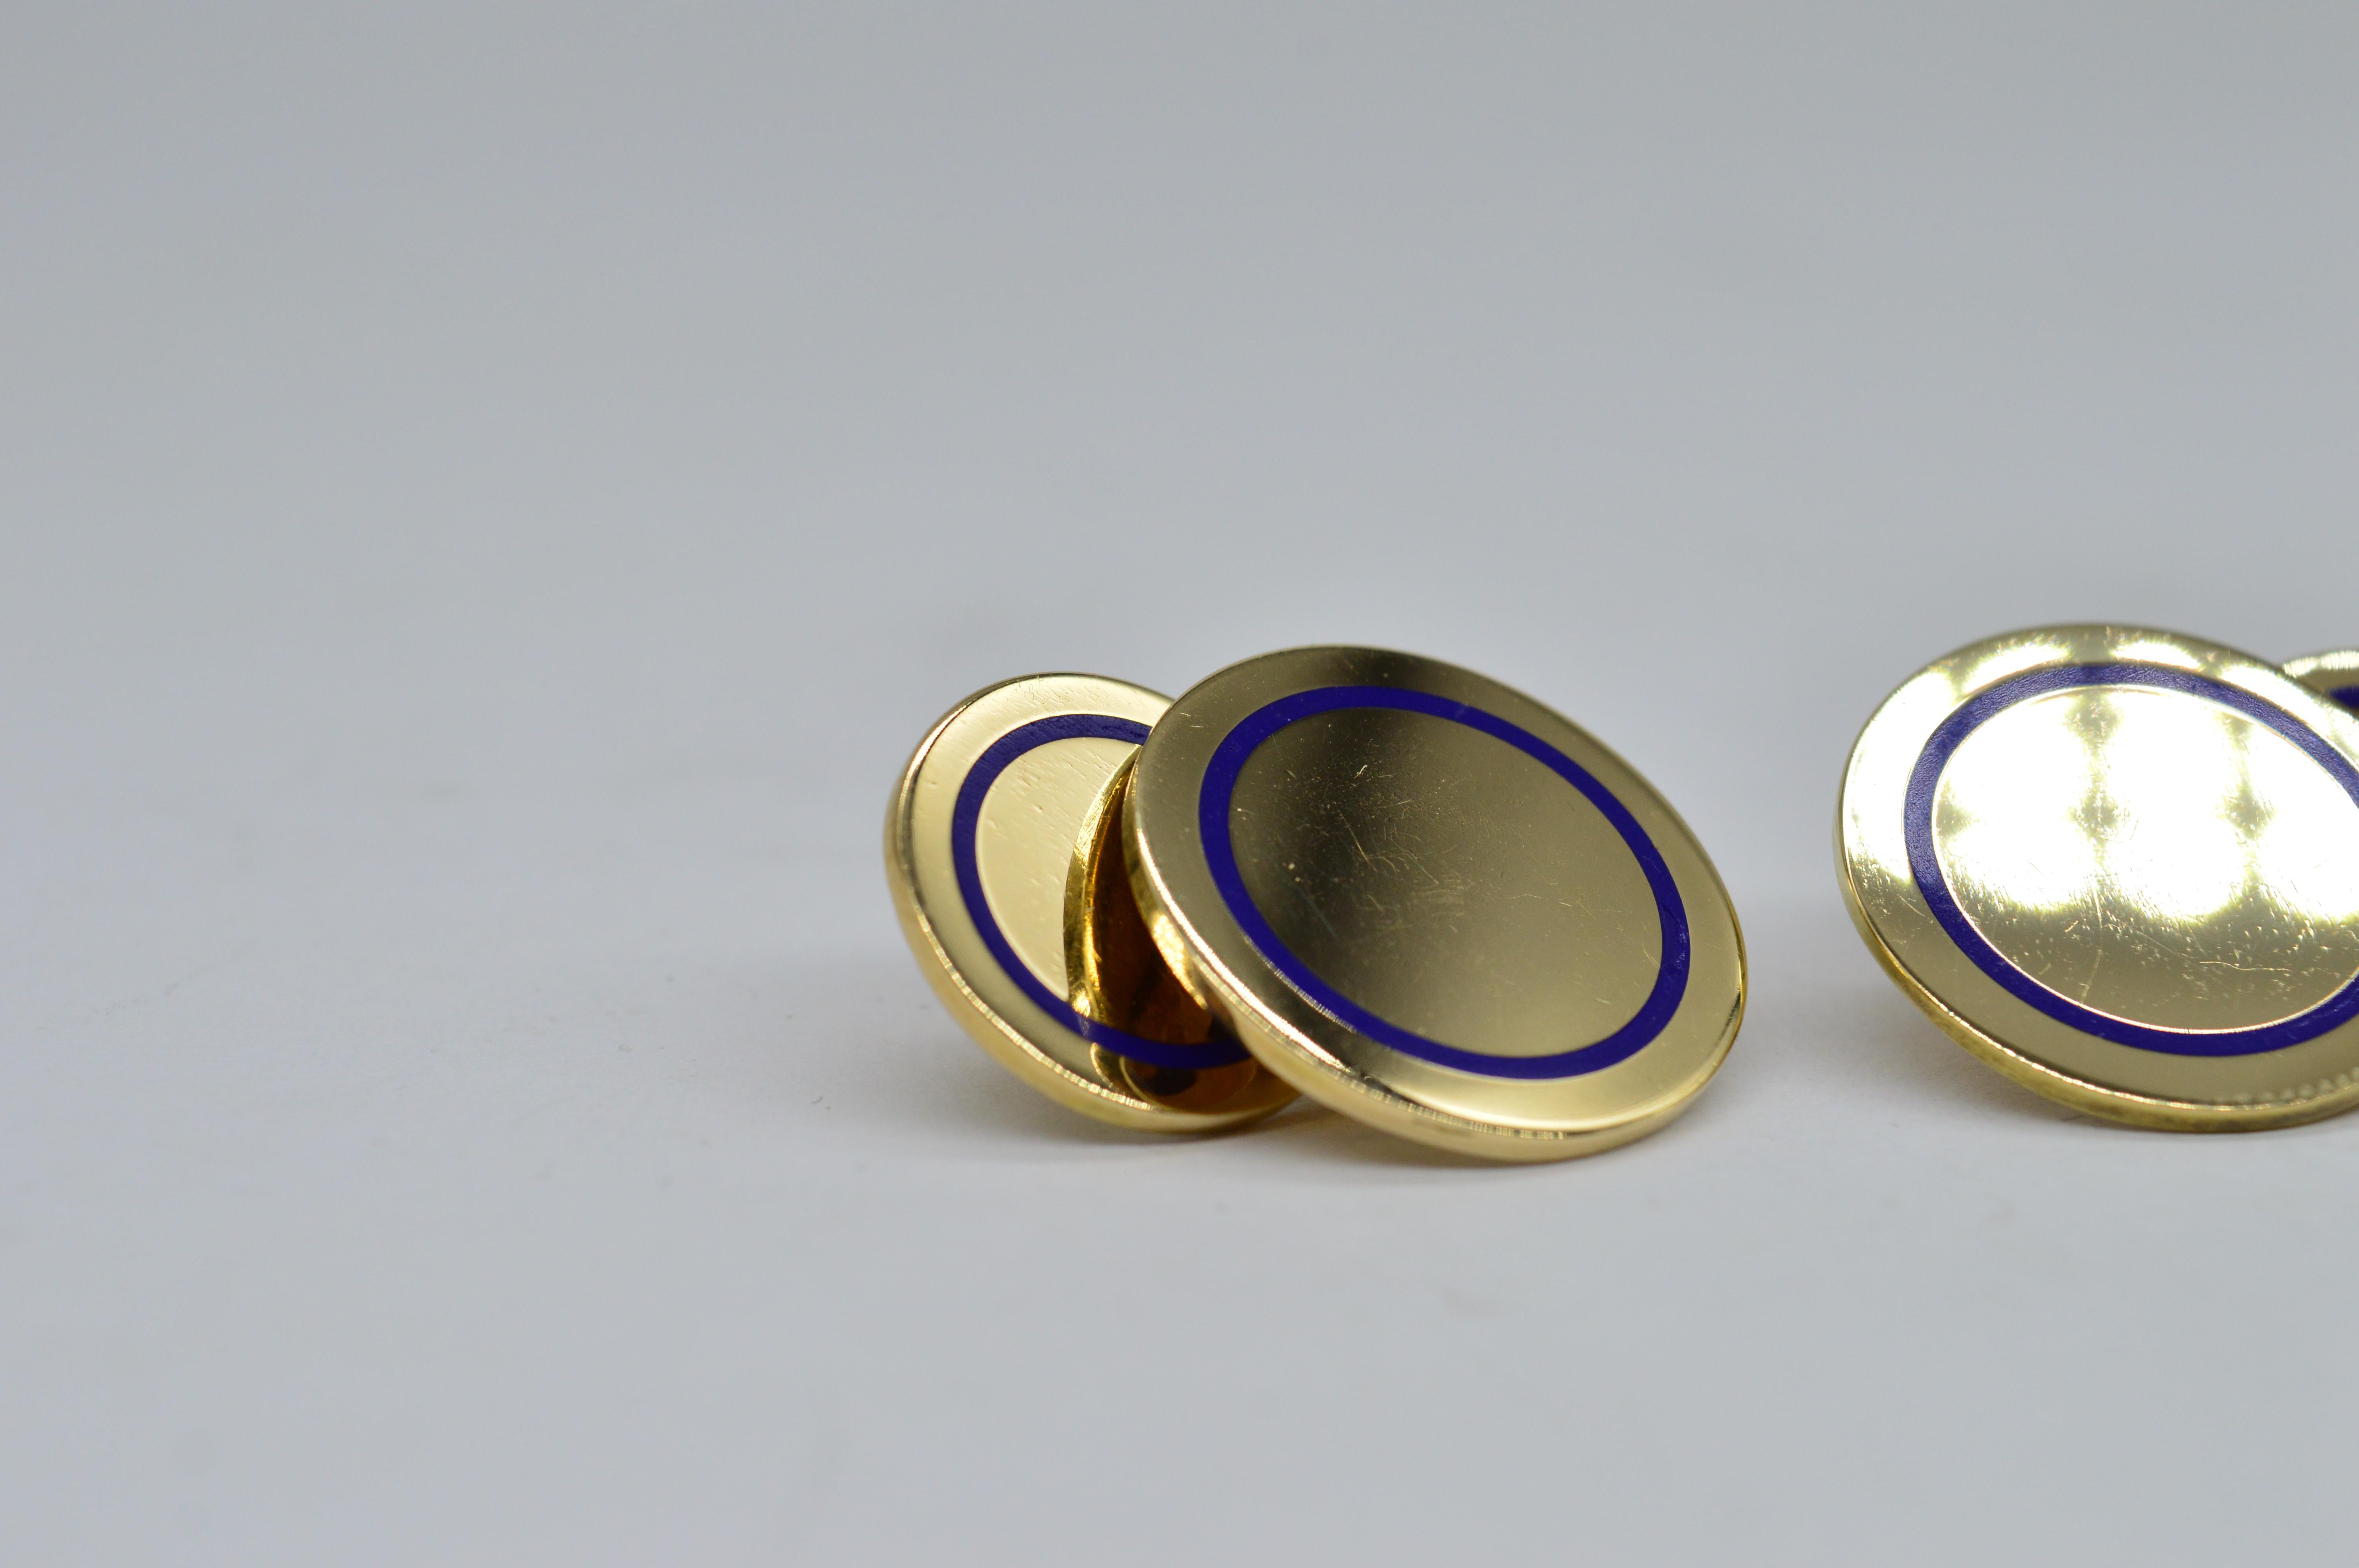 A set of 14ct yellow gold Blue enamel cufflinks made by Tiffany & co 

An antique set made in the USA in the 1920's

17.69g

We have sold to the set of Hit shows like Peaky Blinders and Outlander as well as to Buckingham Palace so our items are